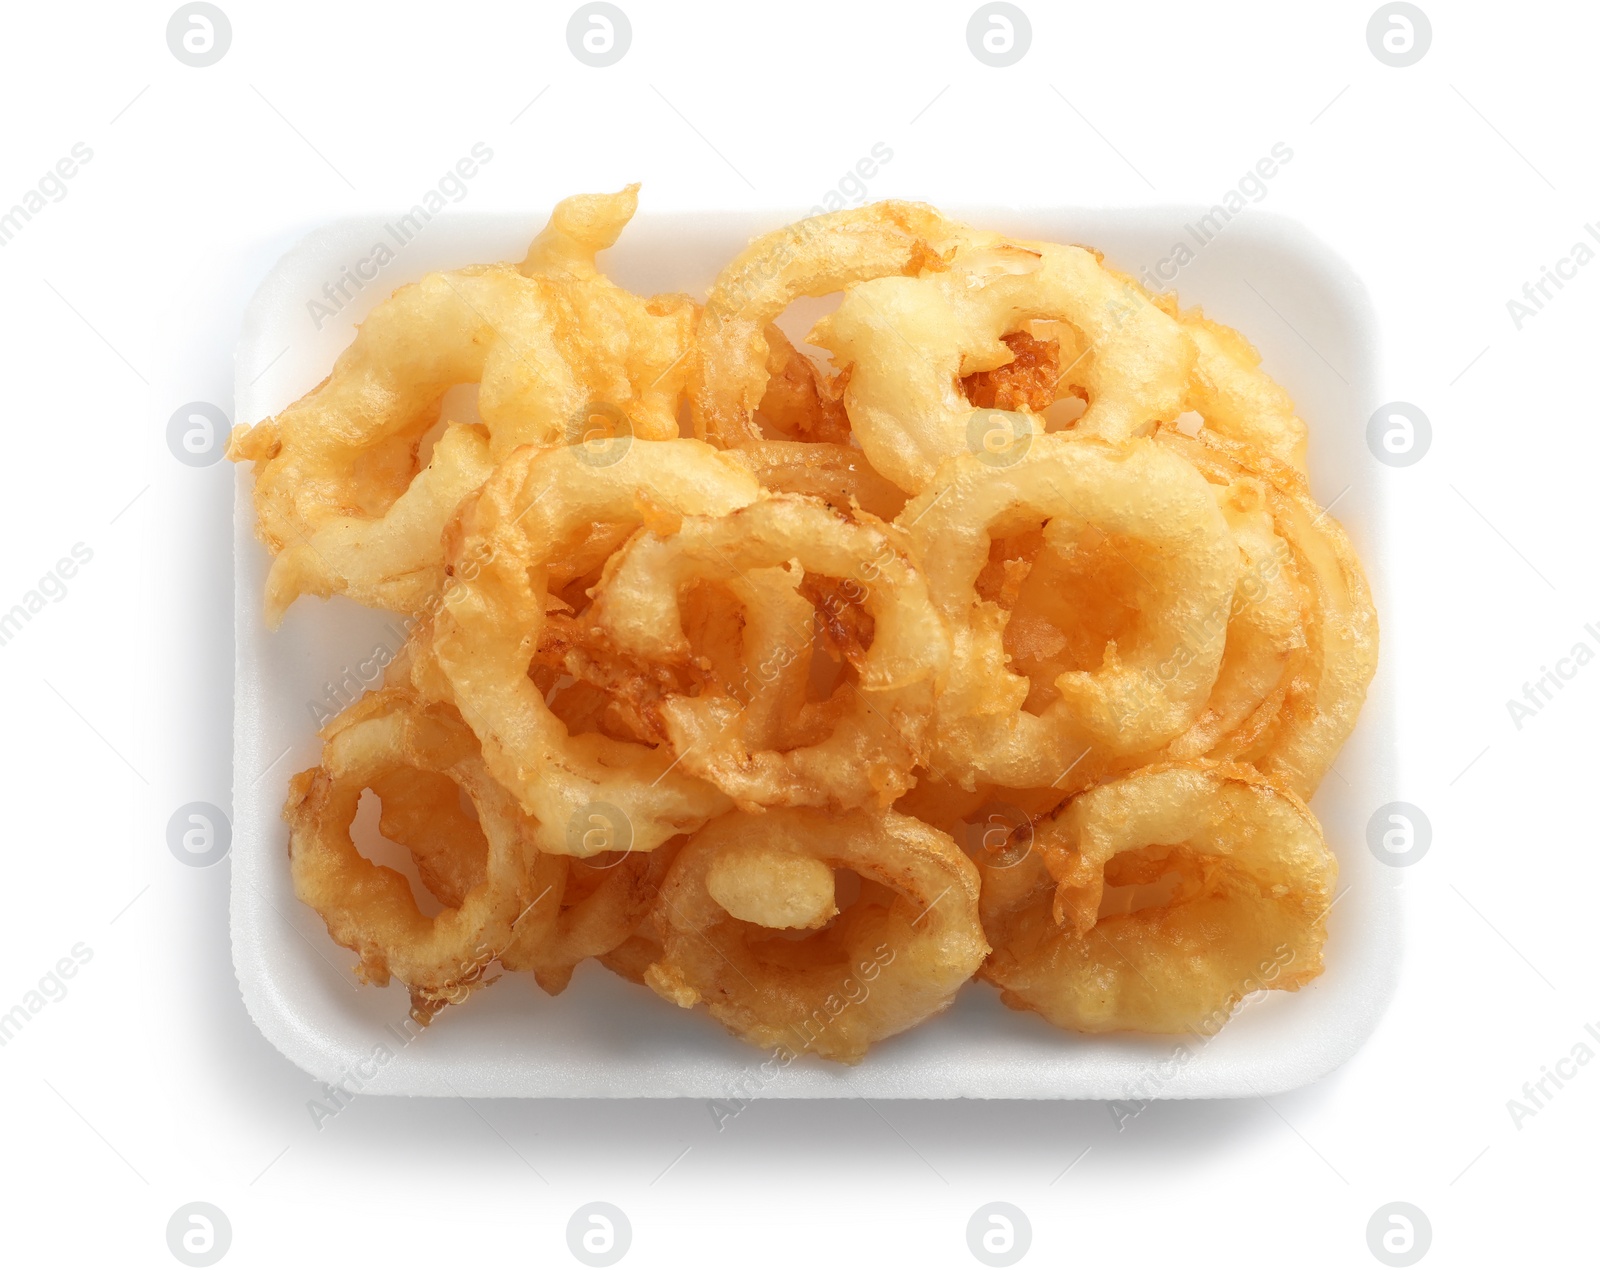 Photo of Plate with delicious golden breaded and deep fried crispy onion rings on white background, top view